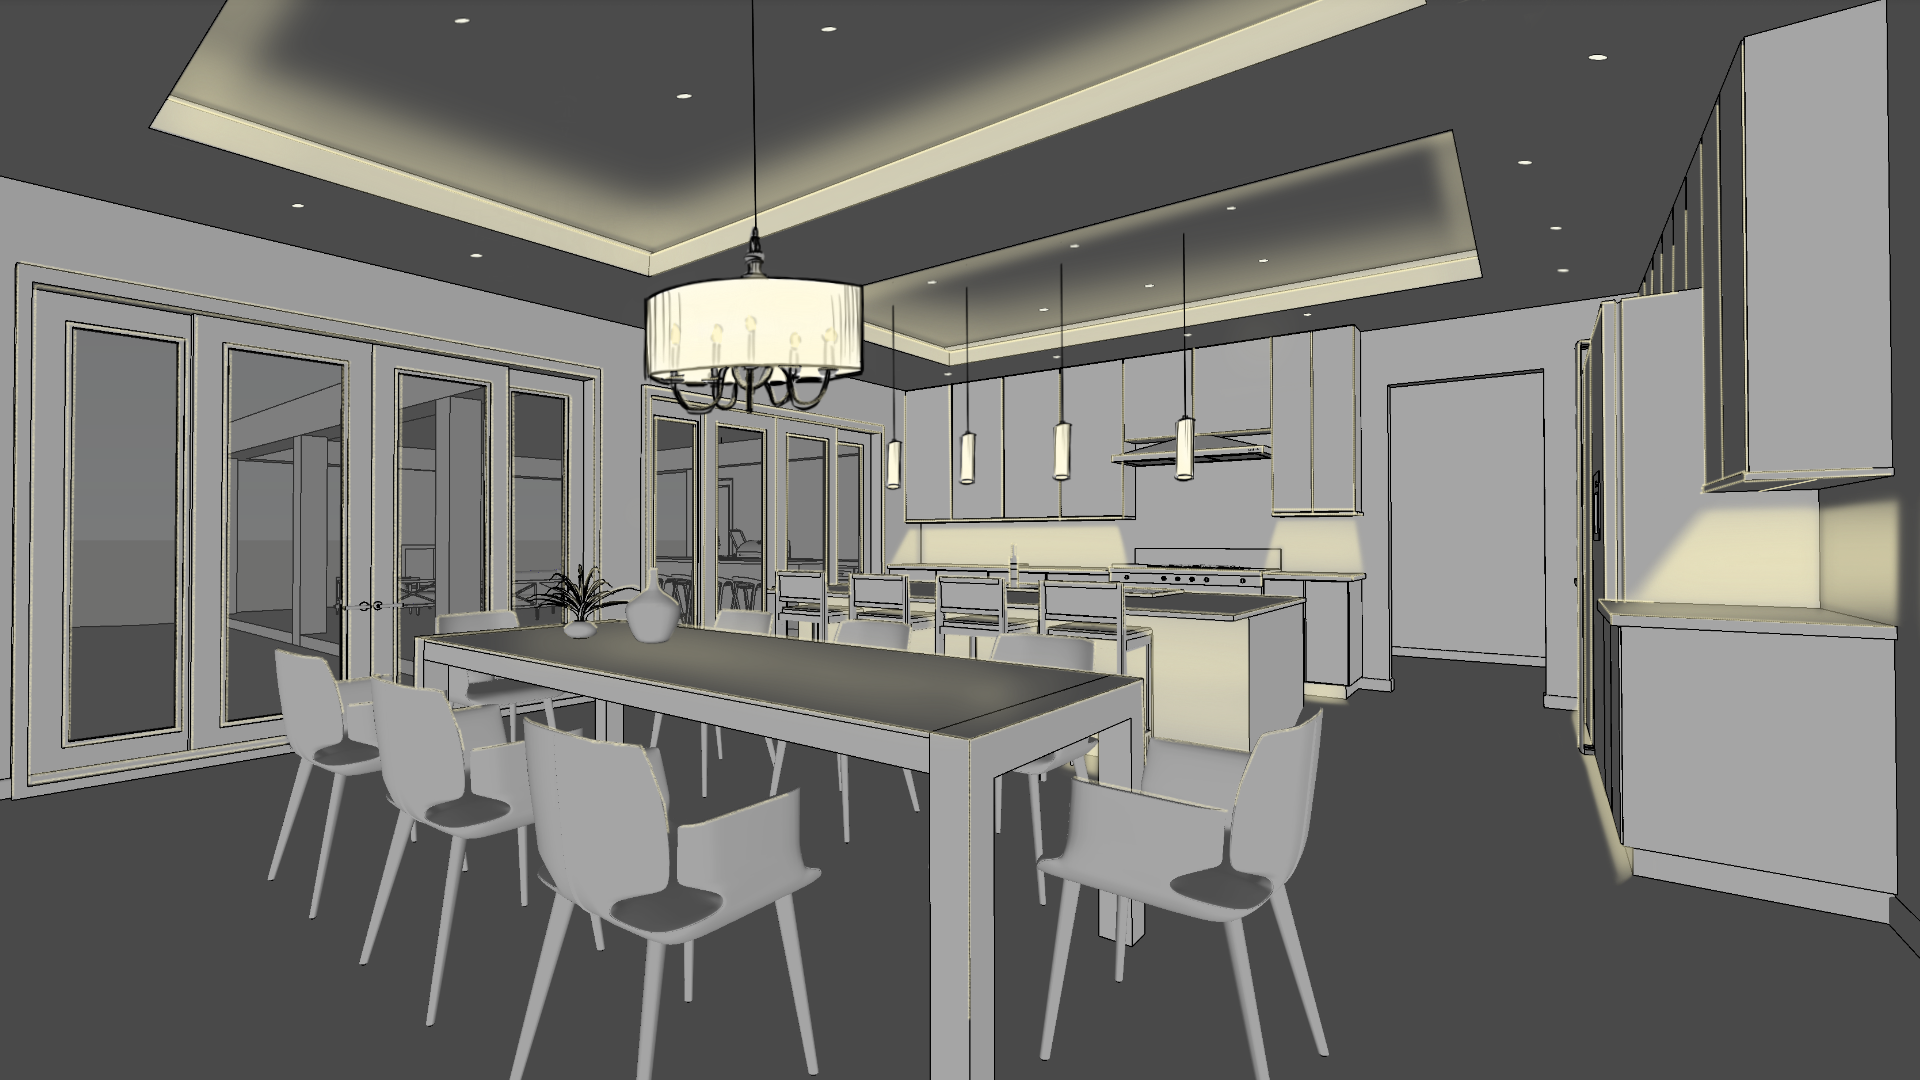 A rendering of a kitchen with emphasis on the lighting